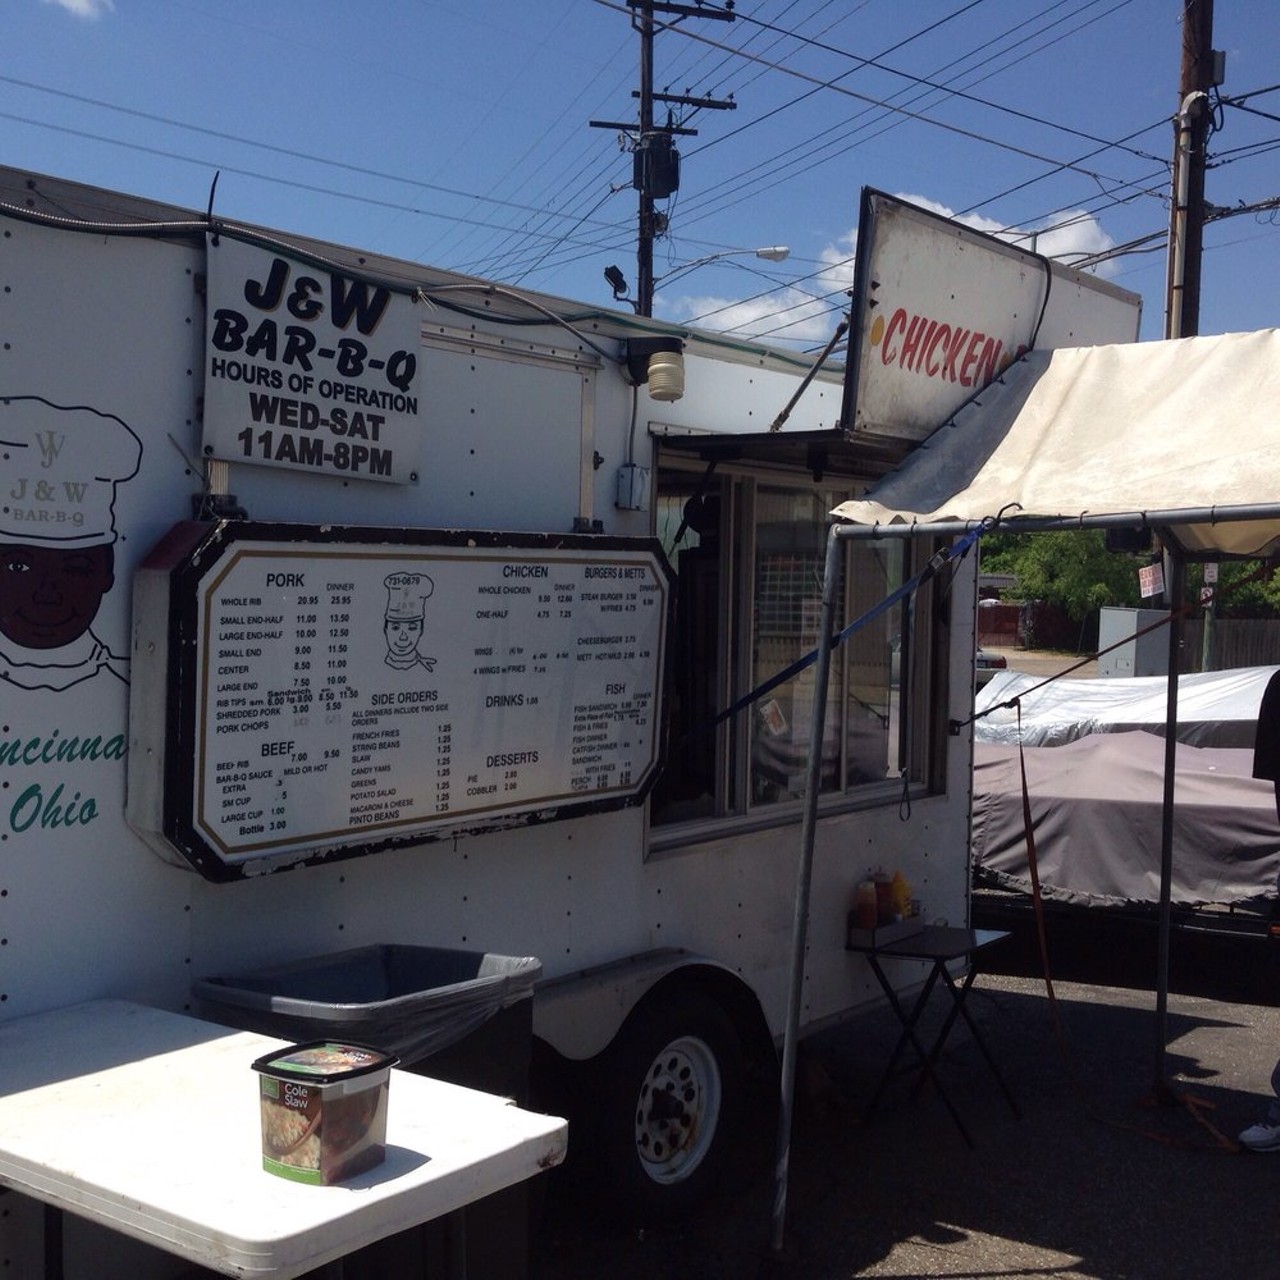 J & W Bar-B-Q (5644 Montgomery Rd, Cincinnati, OH, 513-731-0679)  Just as Cleveland fans rallied around the Seti&#146;s Polish Boy truck when it was perennially parked at Dean&#146;s Supply, Cincinnati has J & W. Sure, you&#146;re not getting white table cloths and ambiance here, but it&#146;s barbecue. Juicy, heaping portions of barbecue straight from the trailer, that is. Don&#146;t expect to sit around at fancy tables. Turn J&W take-out into your own picnic.